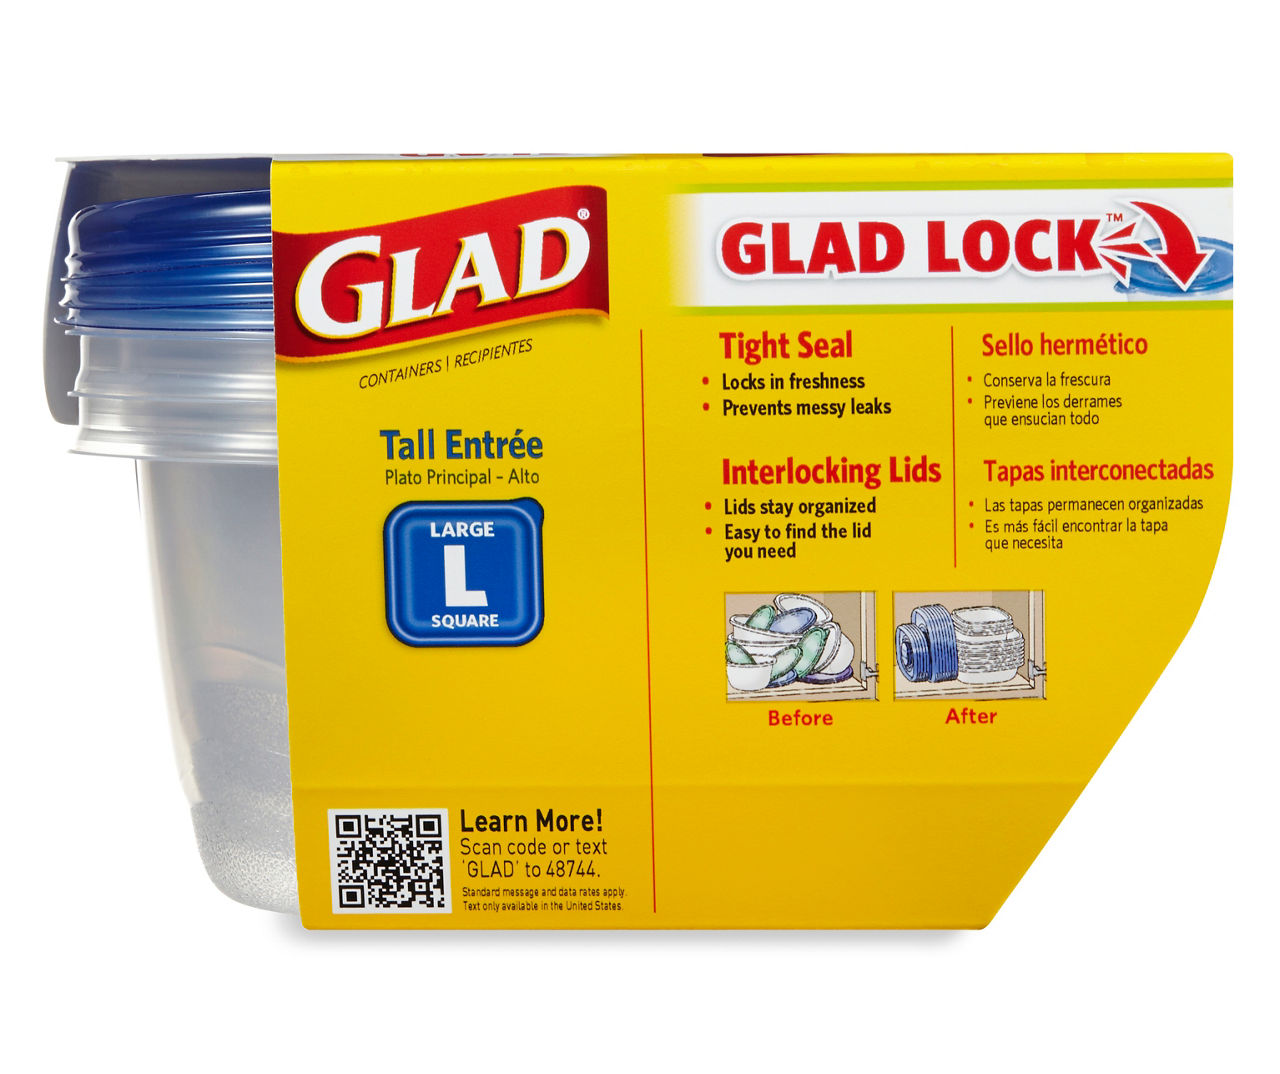 Clorox Glad Tall Entree Food Storage Containers with Lids